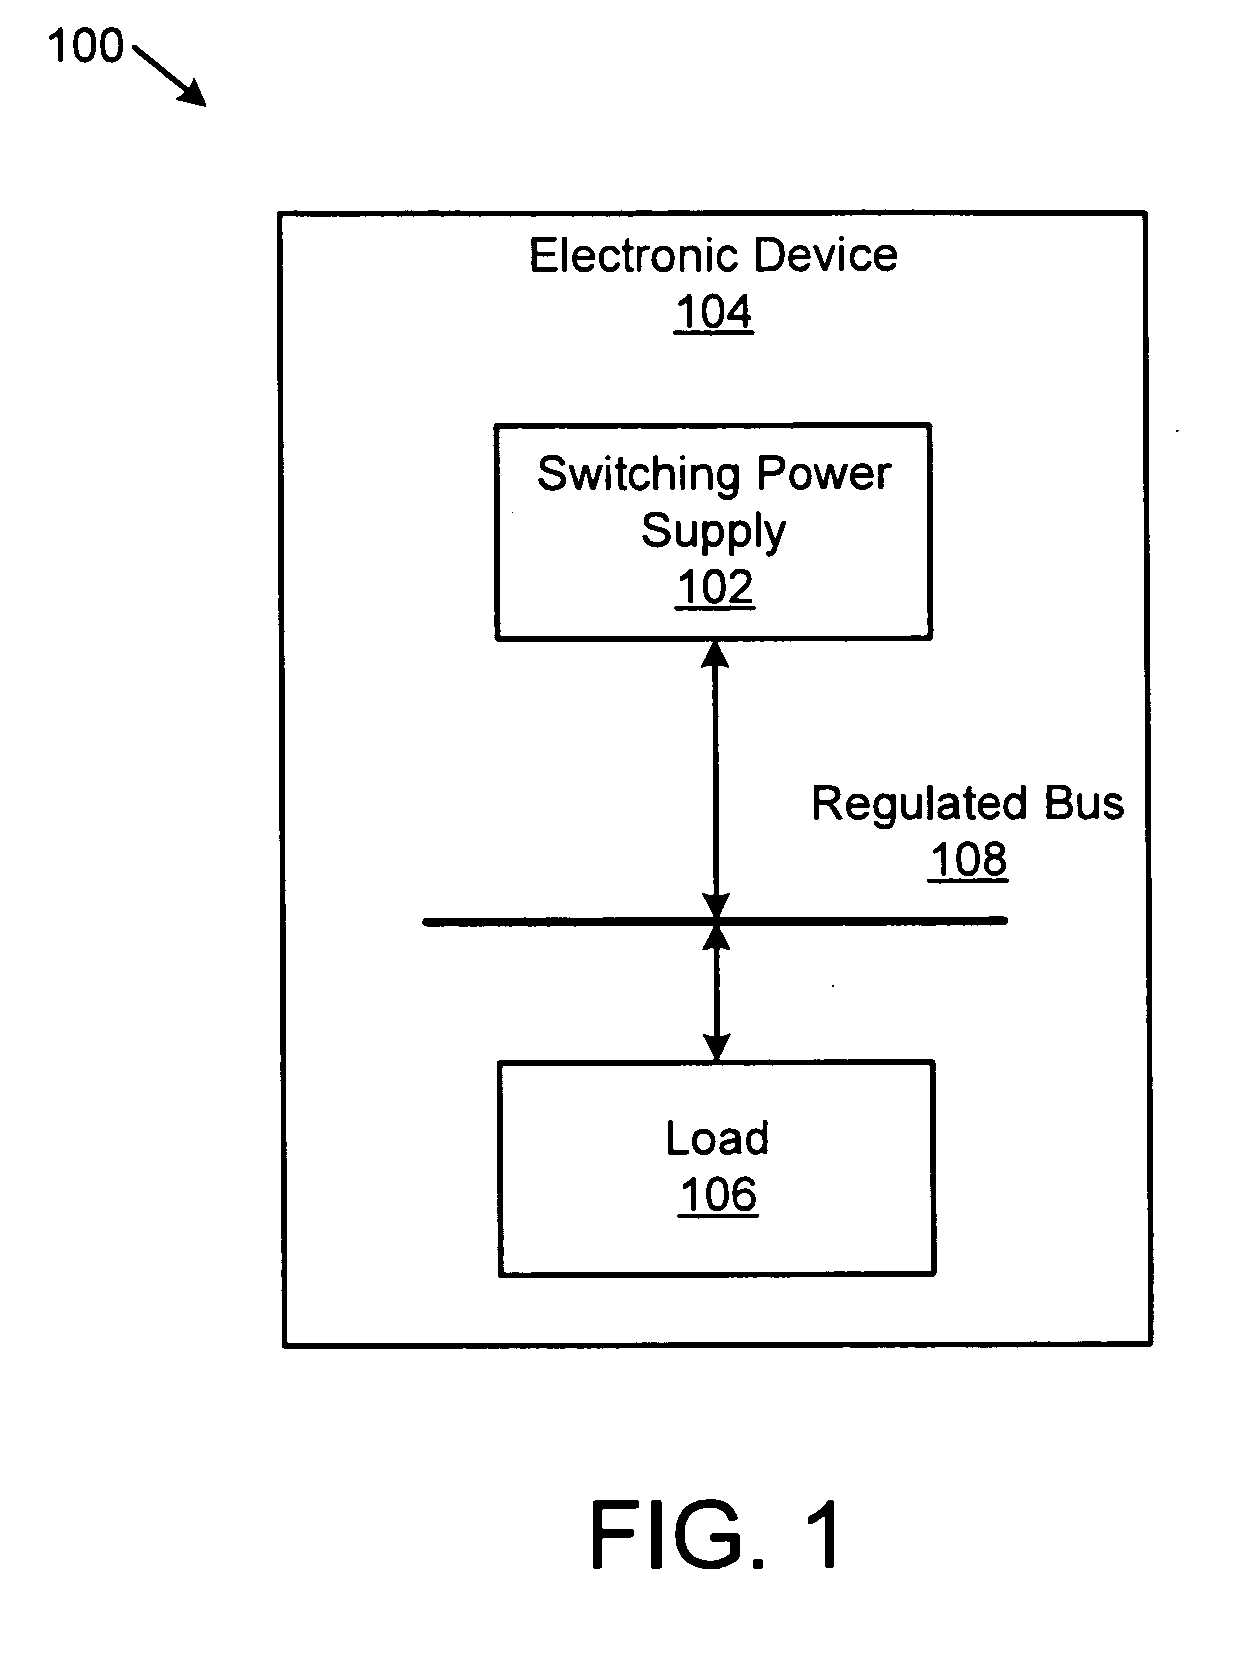 Apparatus, system, and method for an adaptive high efficiency switching power supply